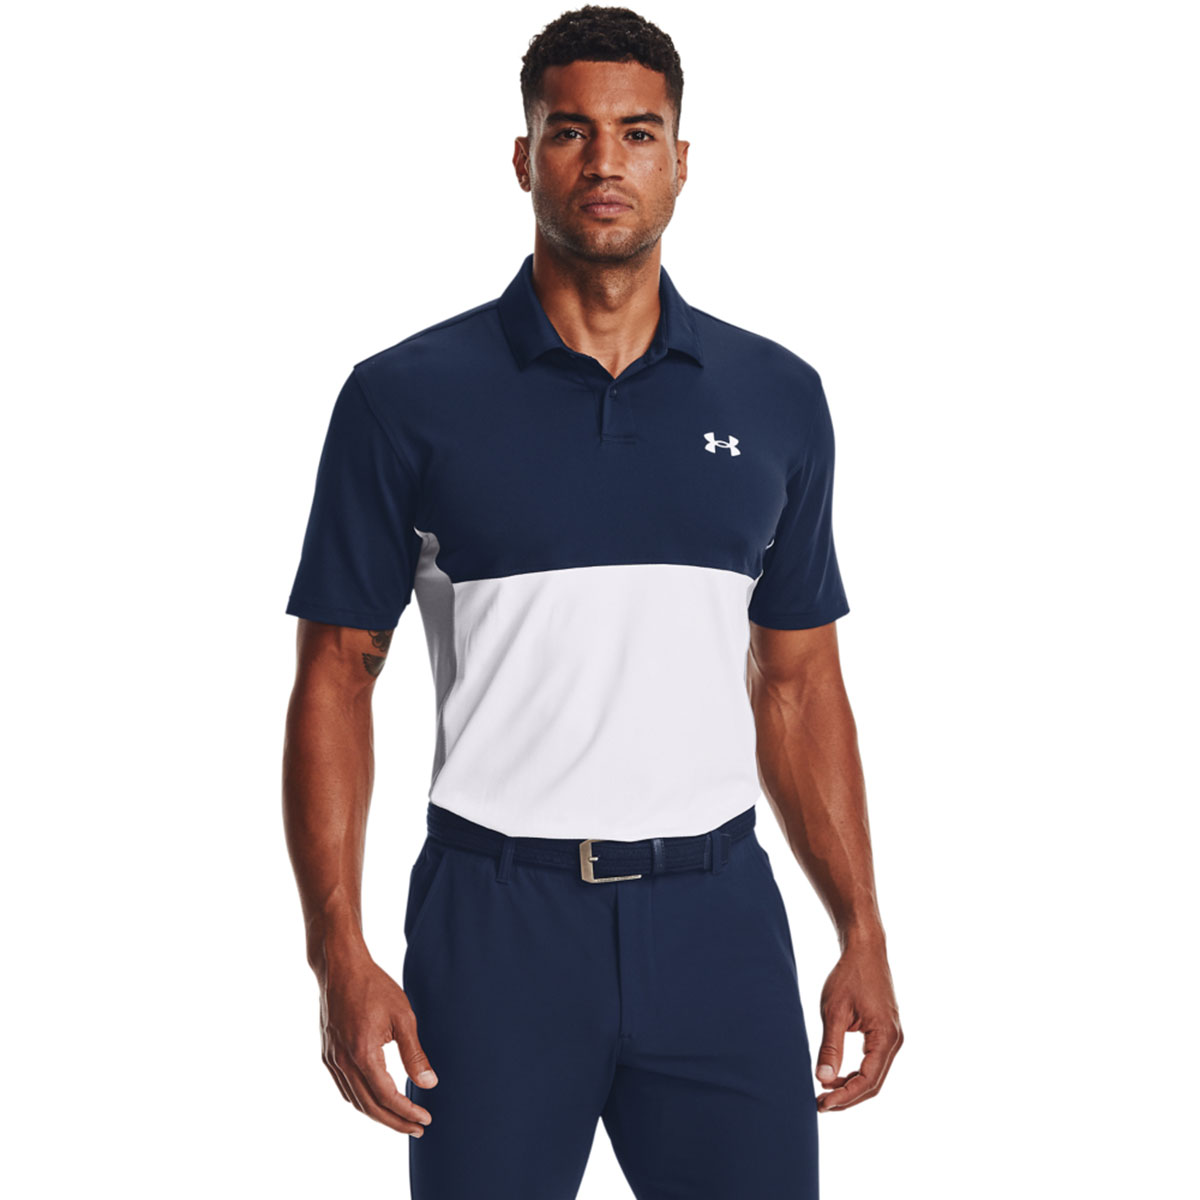 Under Armour Men's Performance Blocked Stretch Golf Polo Shirt from ...